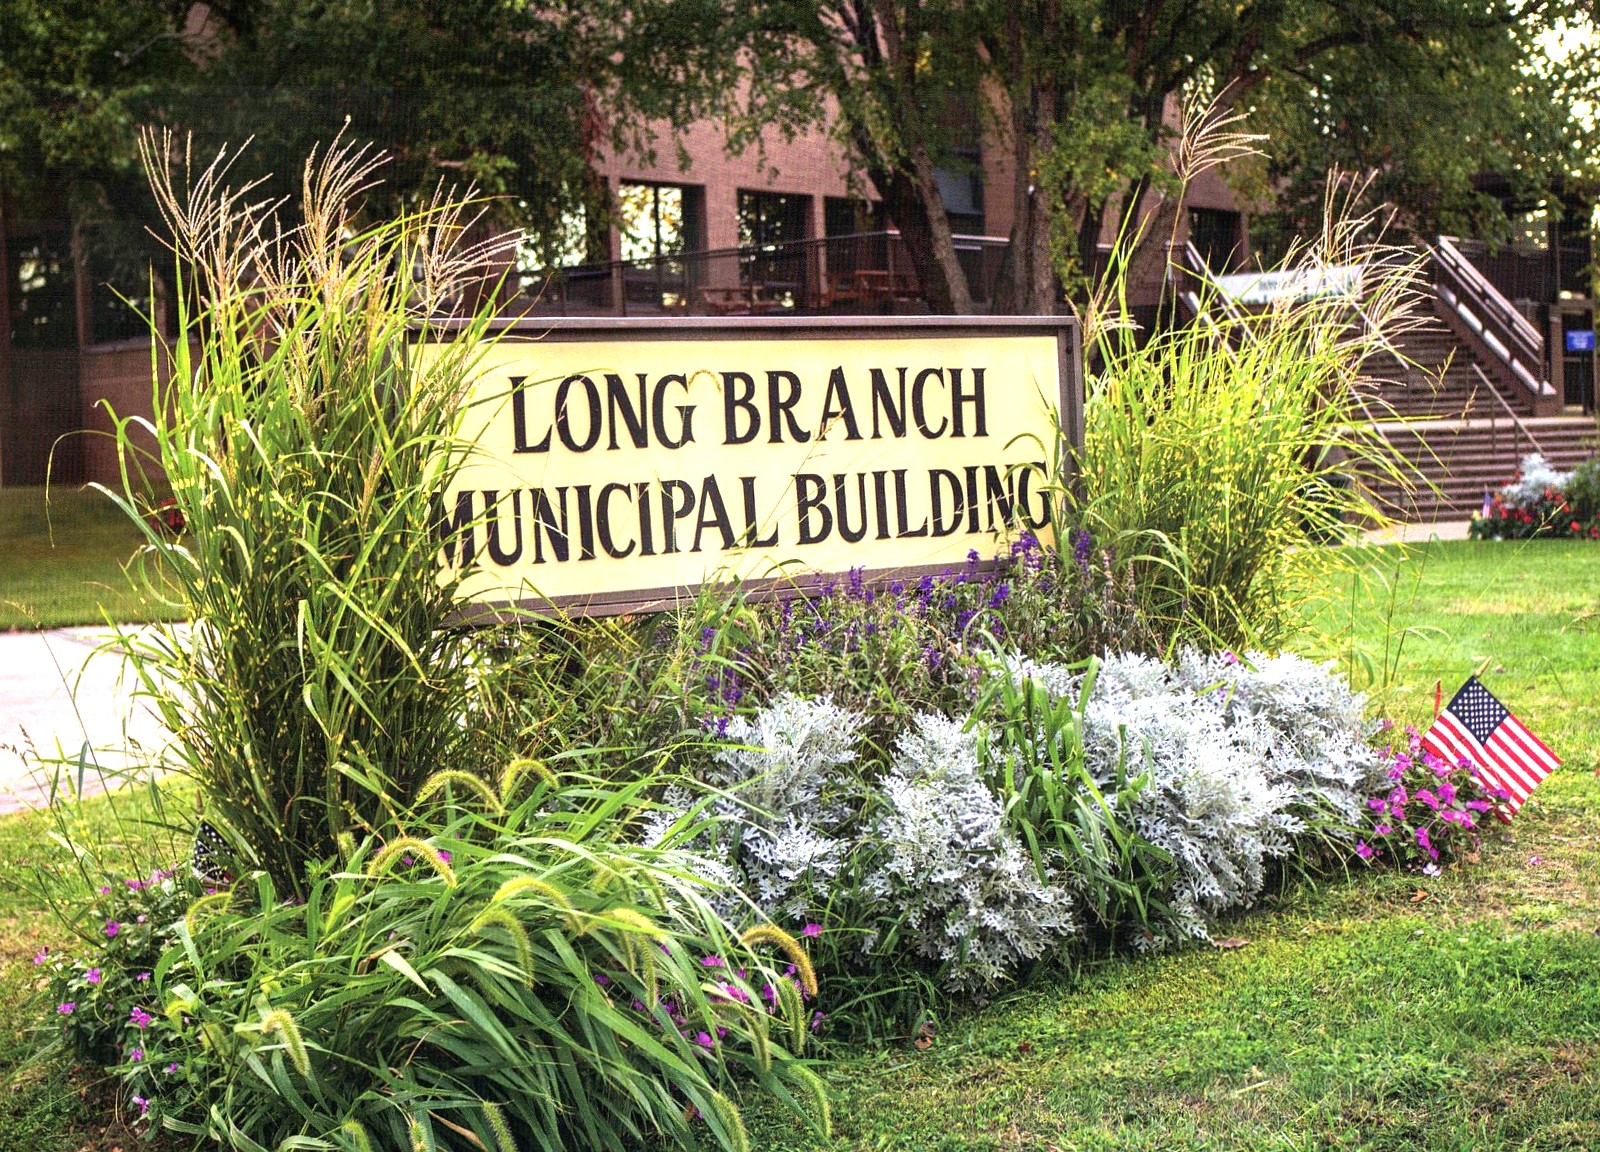 Did you know that Long - The City of Long Branch, NJ